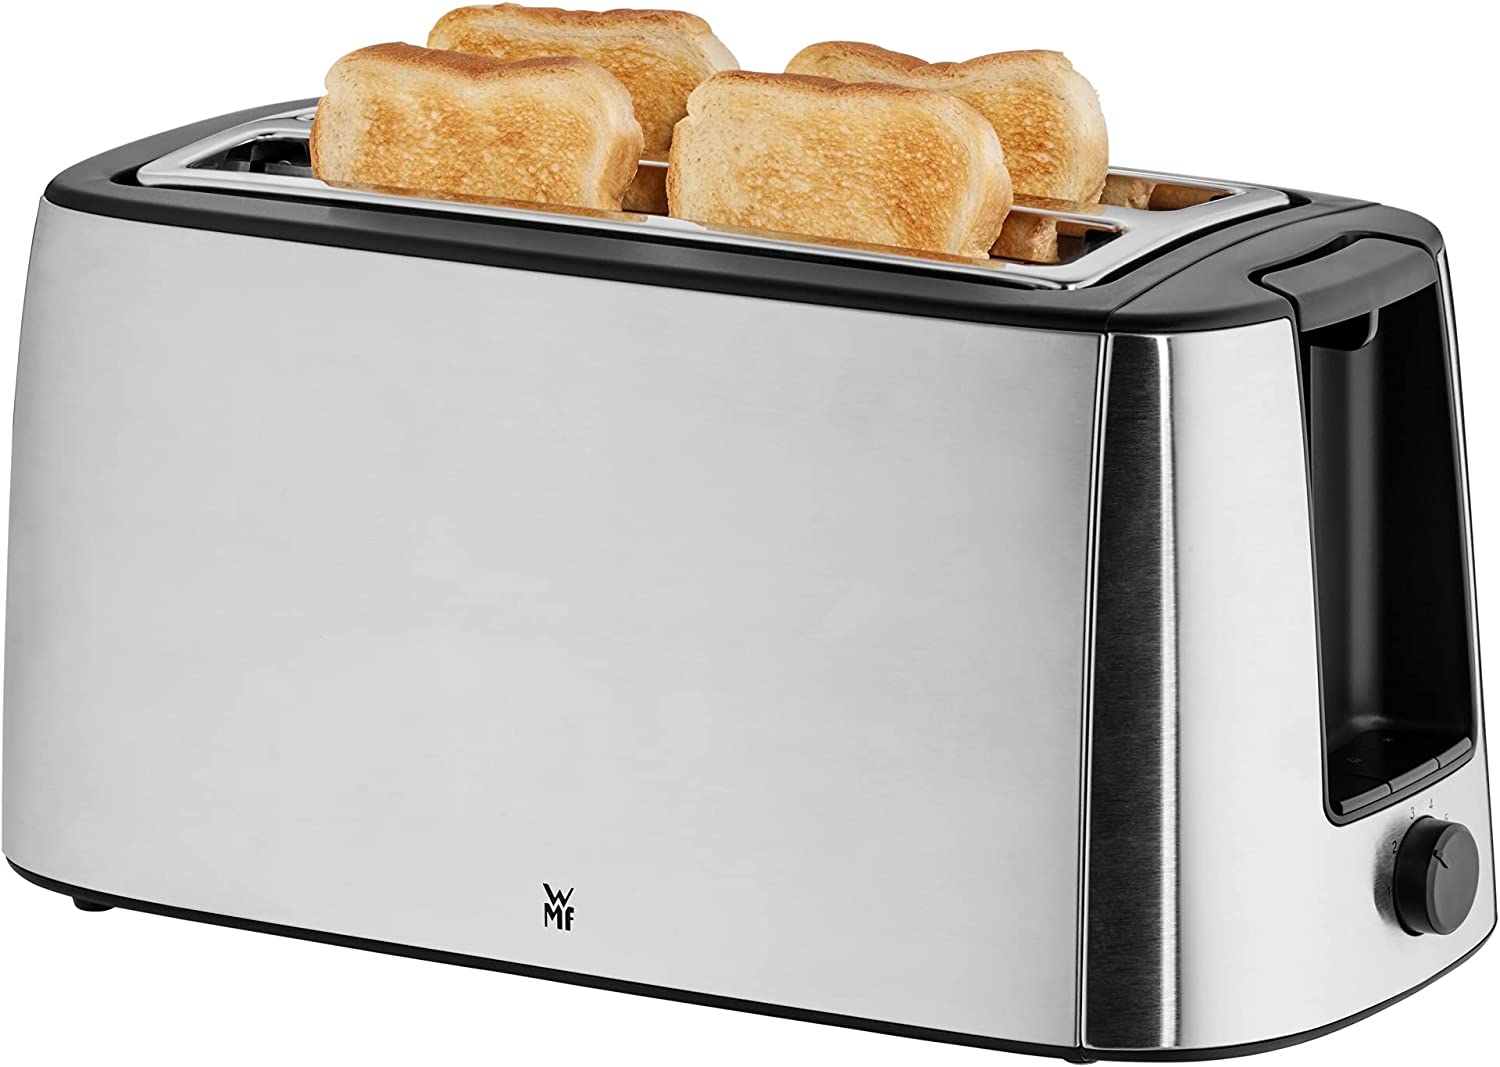 WMF Bueno Pro Toaster, Long Slot, Double Slot for 4 Slices of Toast or 2 Slices of Bread, XXL Toast, Warm-up Function, 6 Browning Levels, Matt Stainless Steel